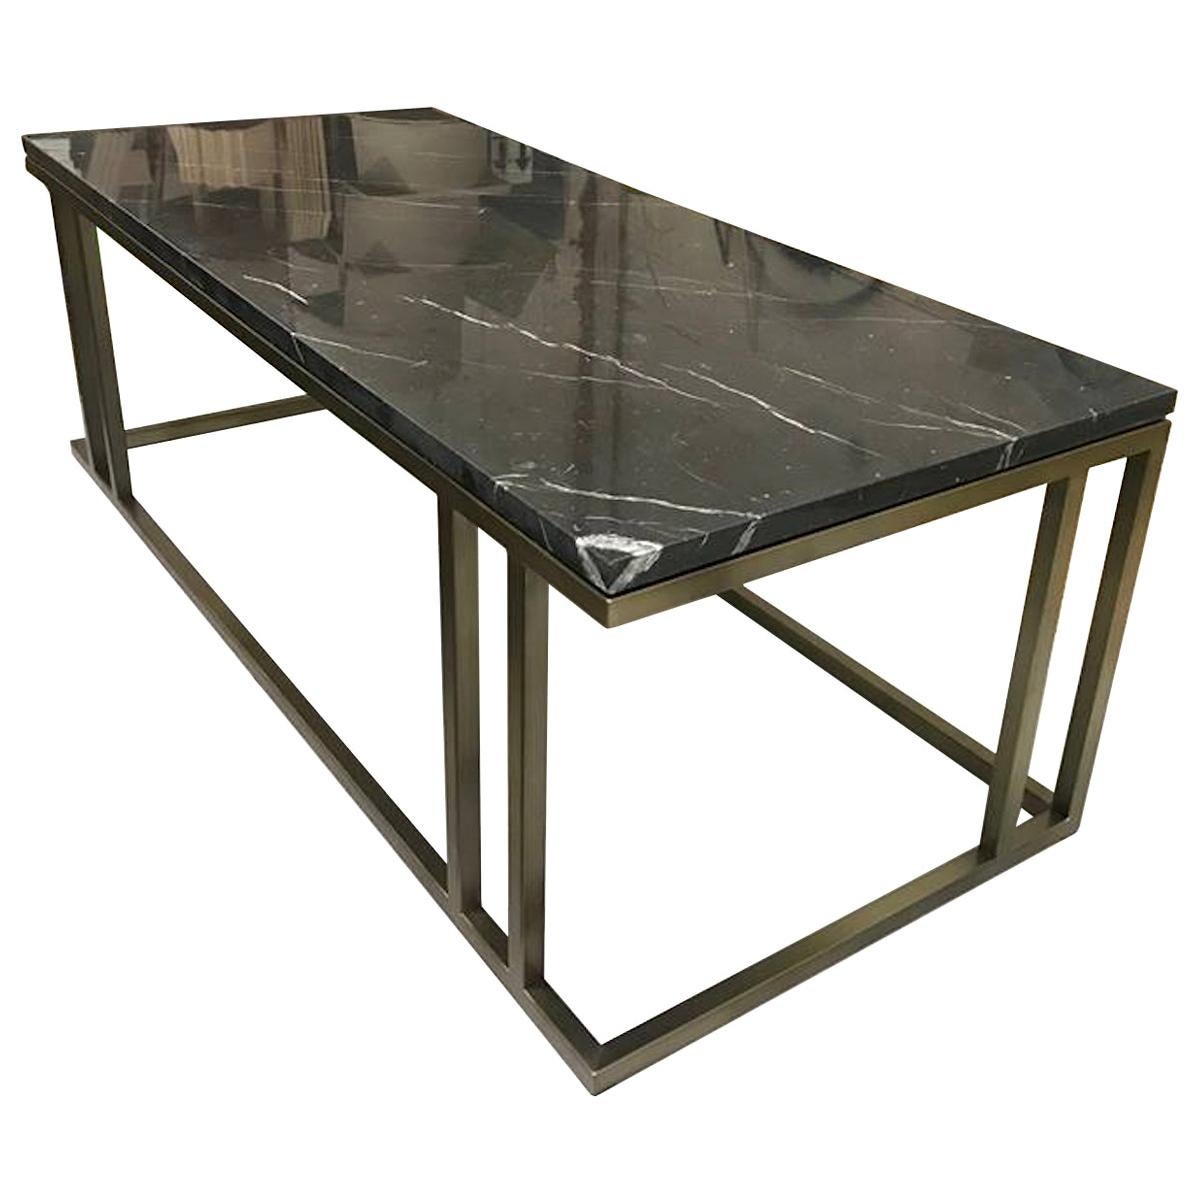 Bespoke Art Deco Inspired Elio Coffee Table Brass Plate Structure, Black Marble